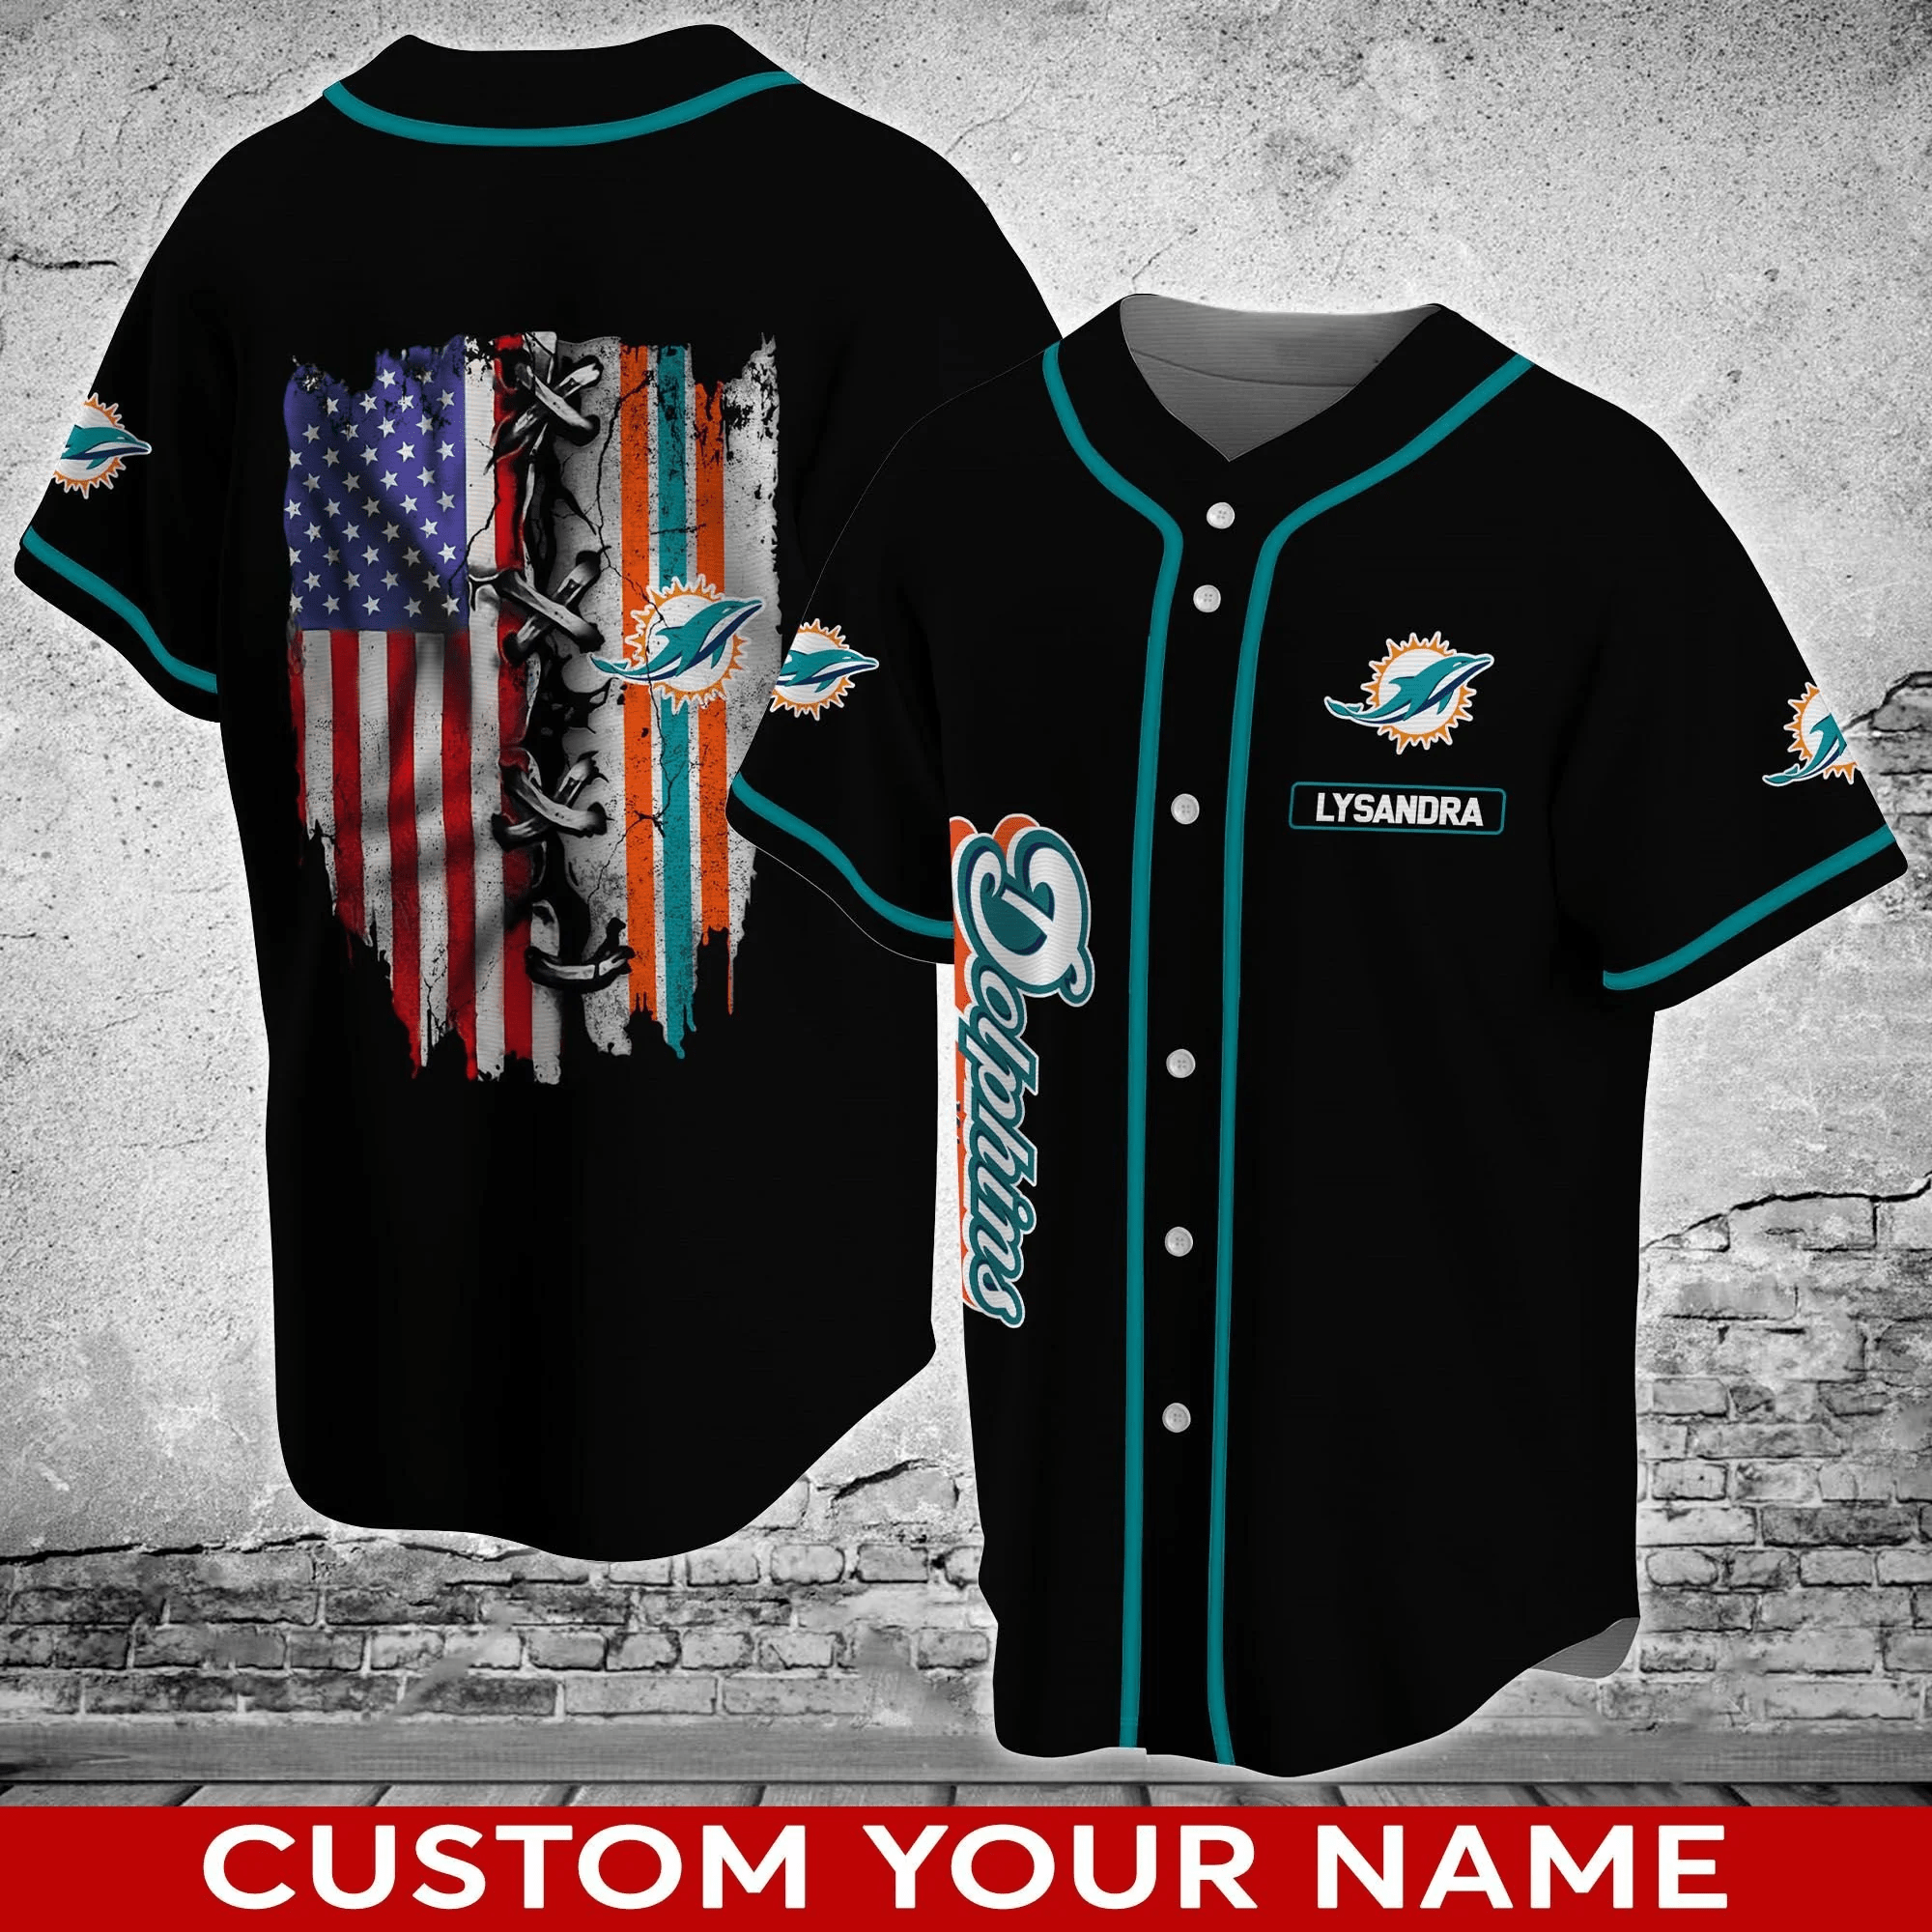 Miami Dolphins NFL Personalized Custom Name Baseball Jersey Shirt